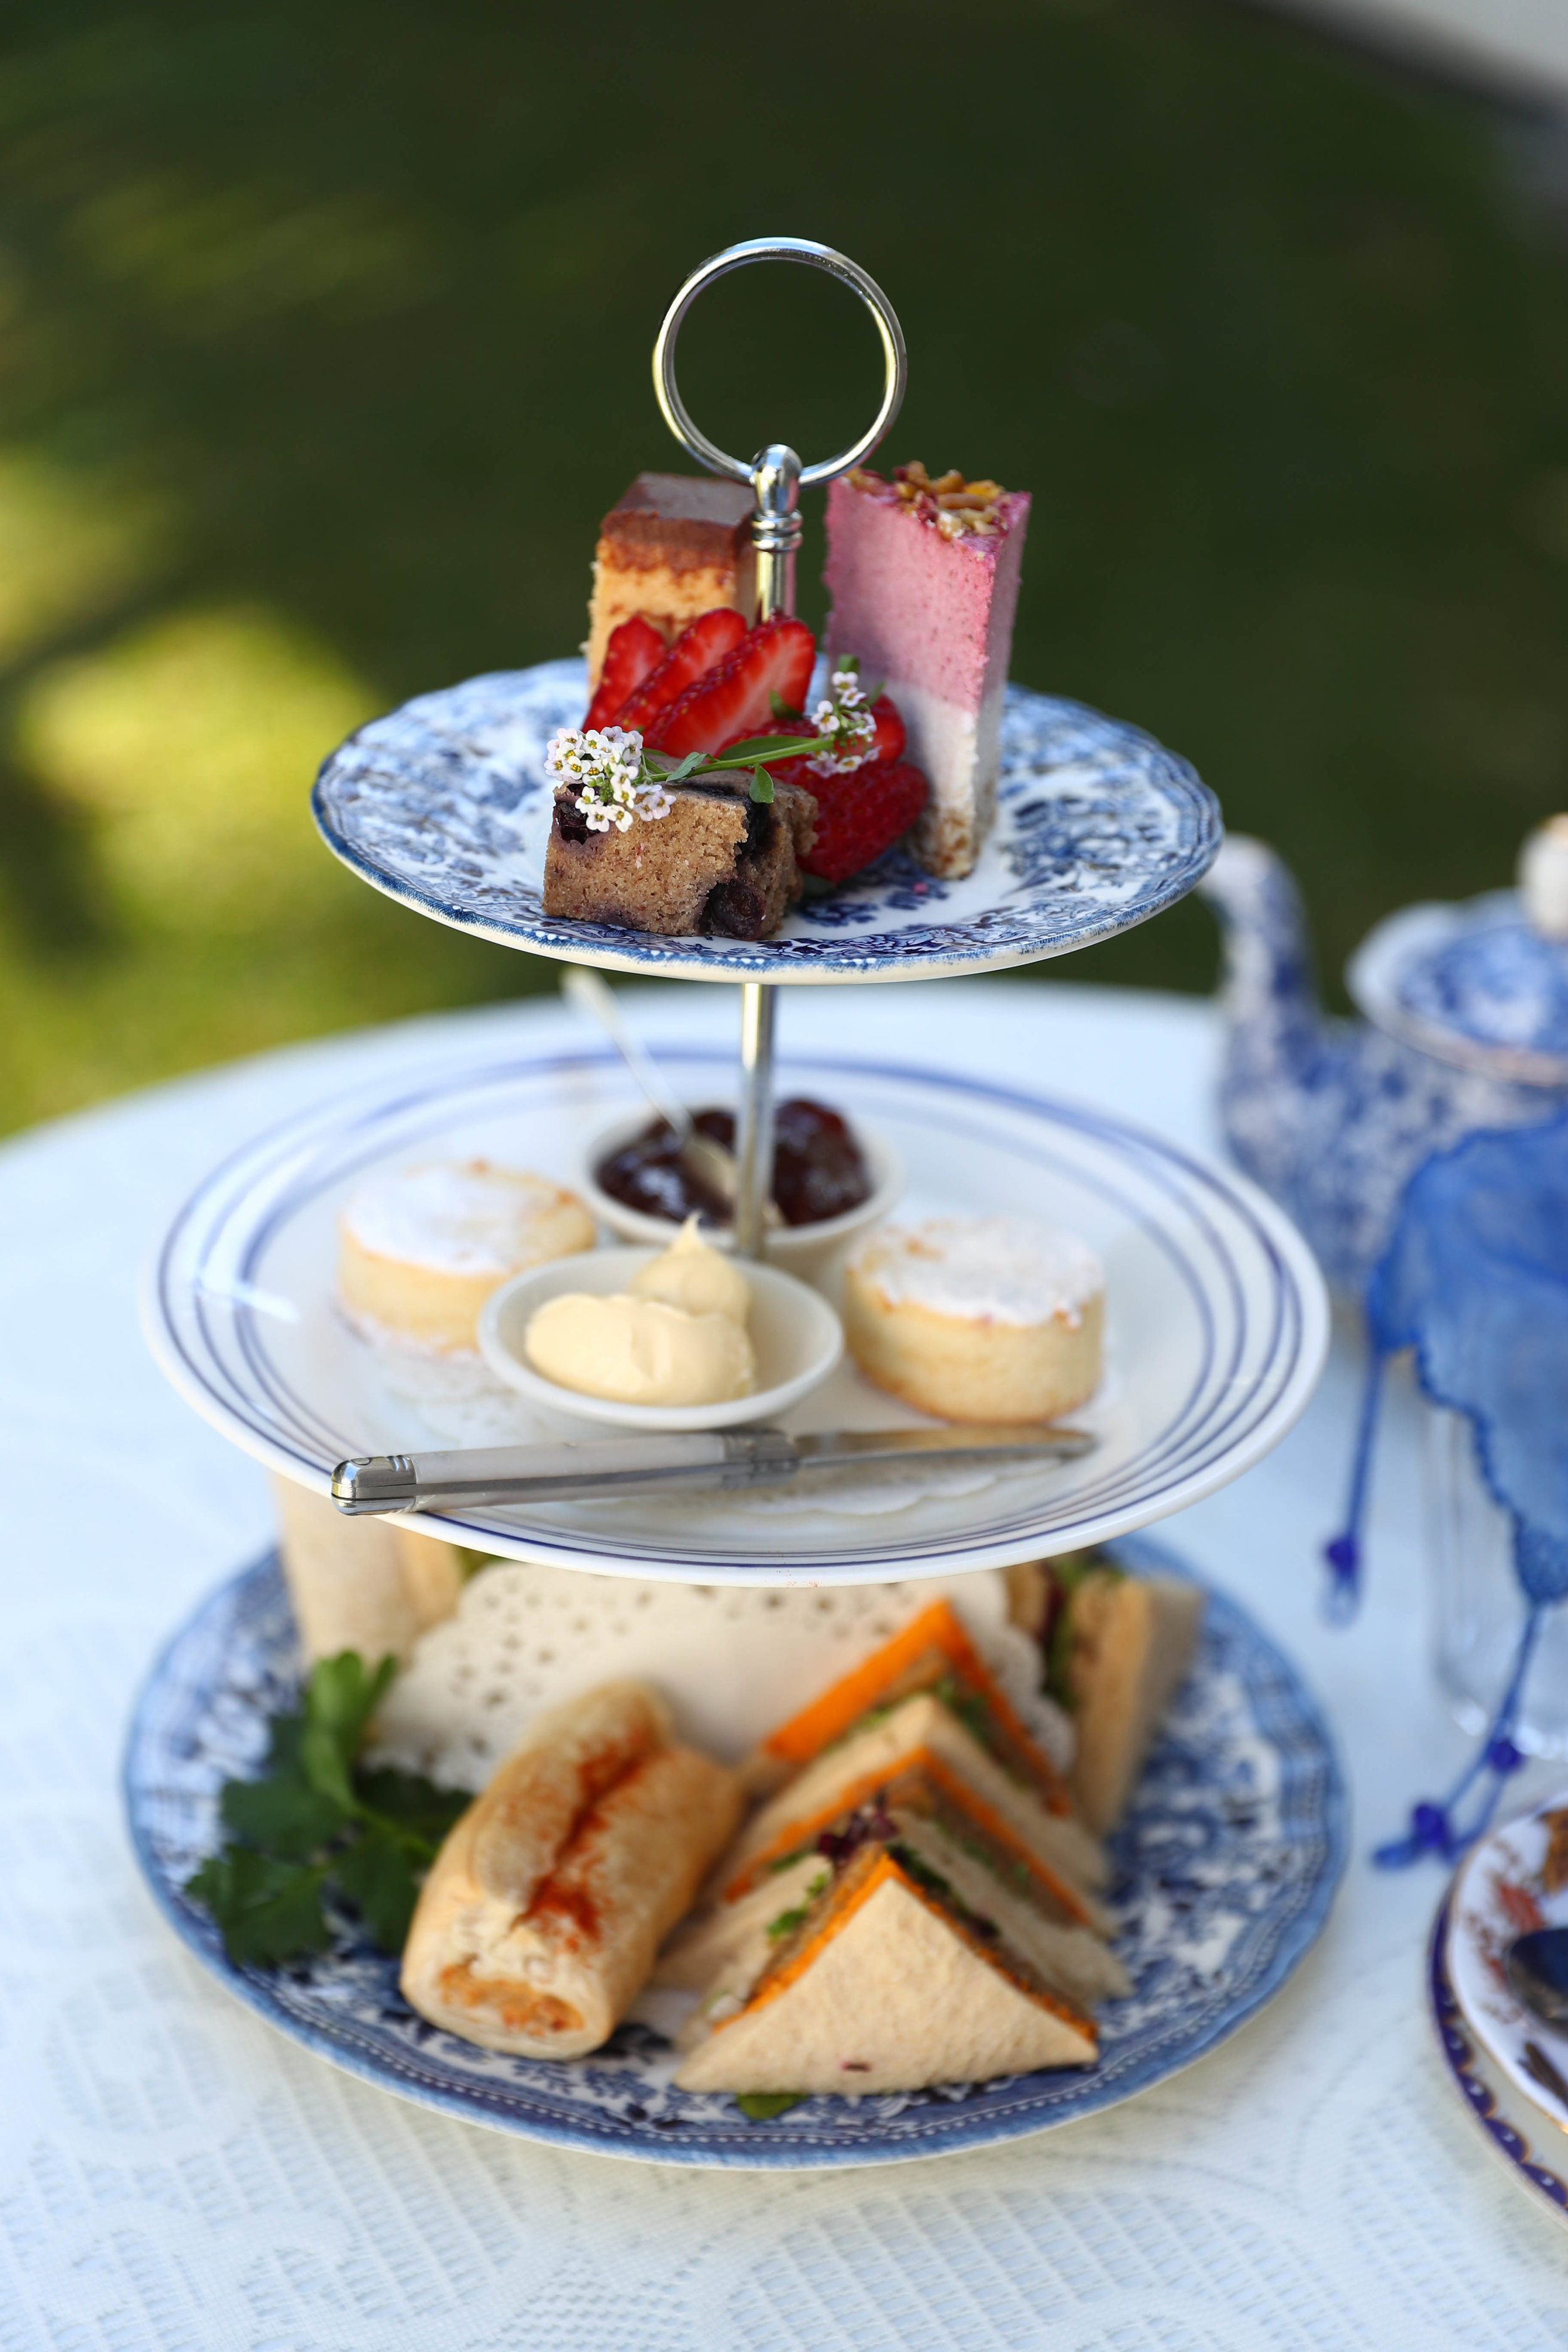 Vegan high tea is served on a beautiful, vintage tiered tray